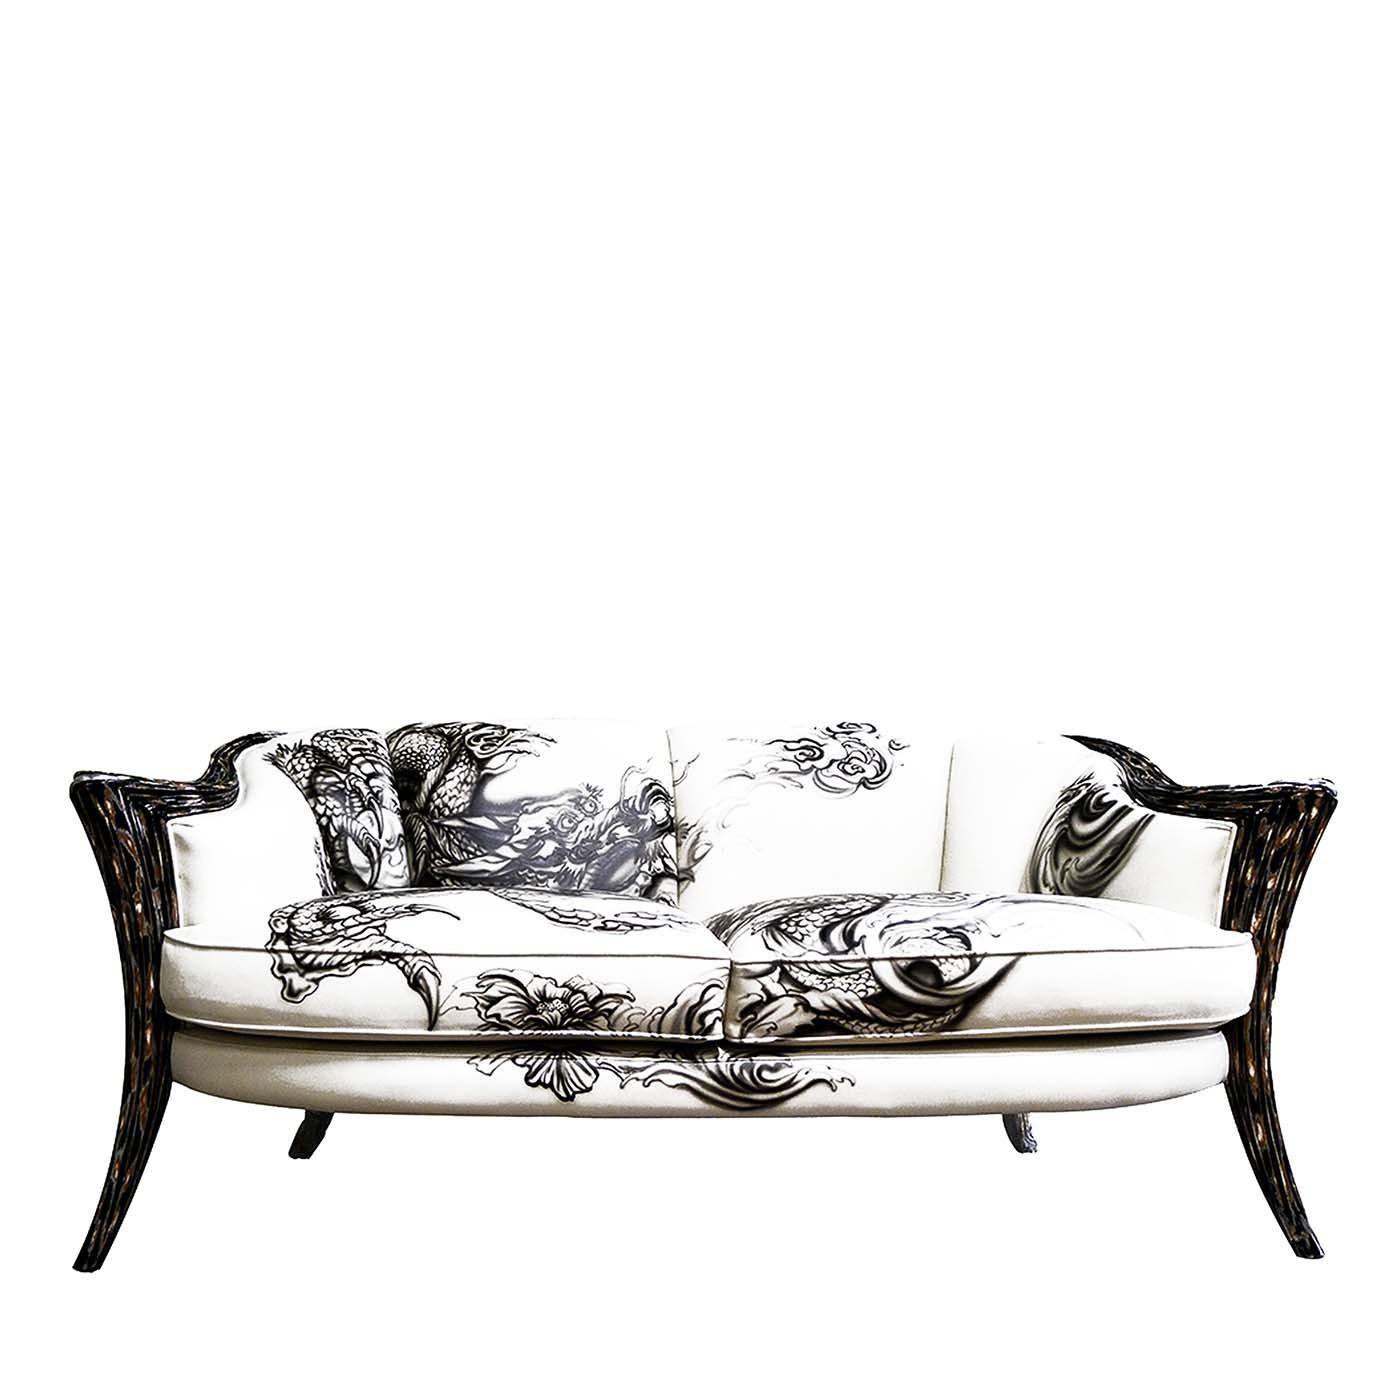 A stunning addition to a modern or eclectic home, this one-of-a-kind two-seat sofa, part of the Opus Futura collection, will make a statement in living room, bedroom or study, infusing a room with unique charm. The wooden frame of the carved legs